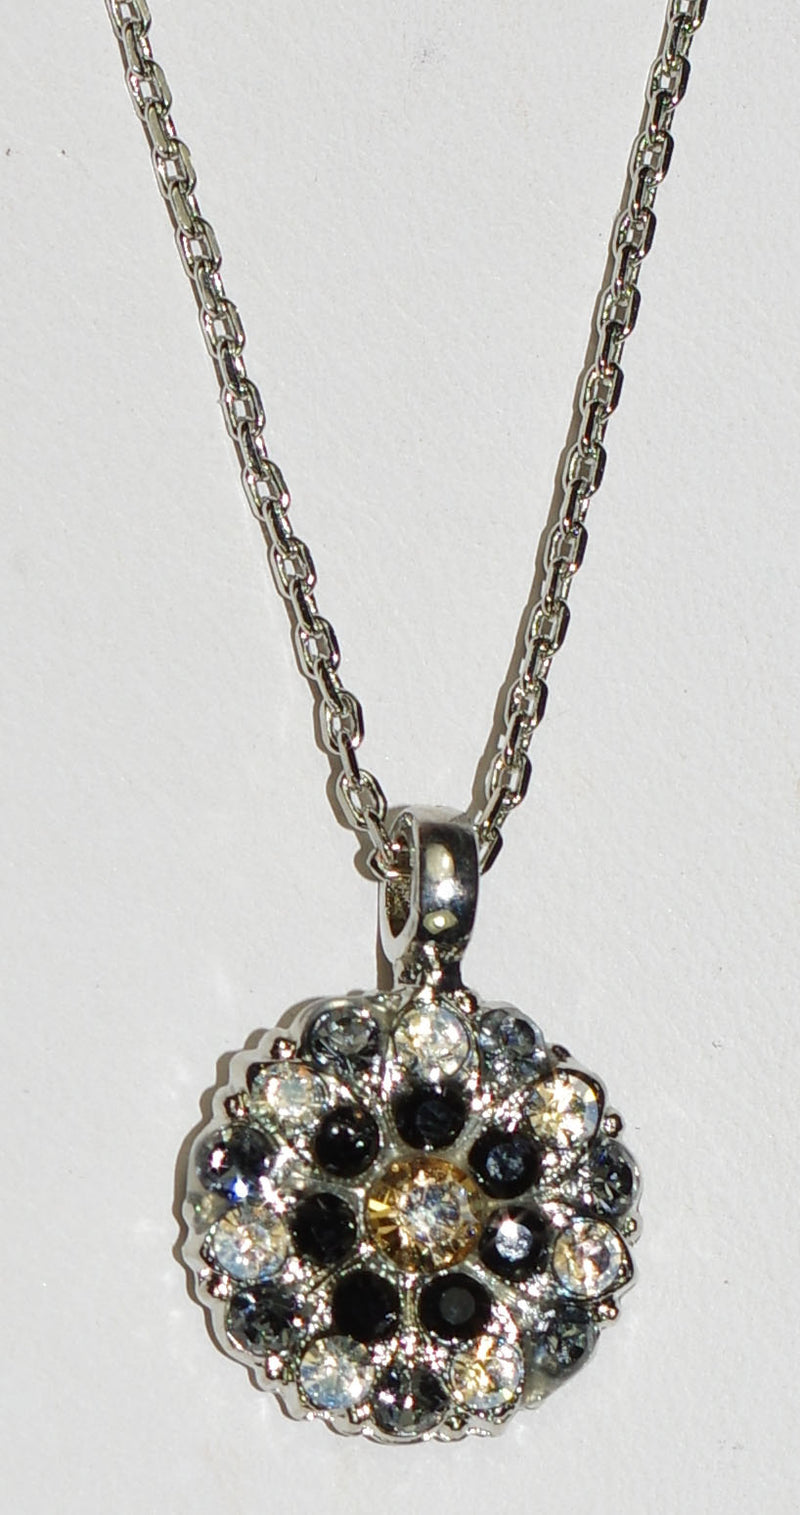 MARIANA ANGEL PENDANT BLACK ORCHID: black, amber, clear stones in silver rhodium setting, 18" adjustable chain